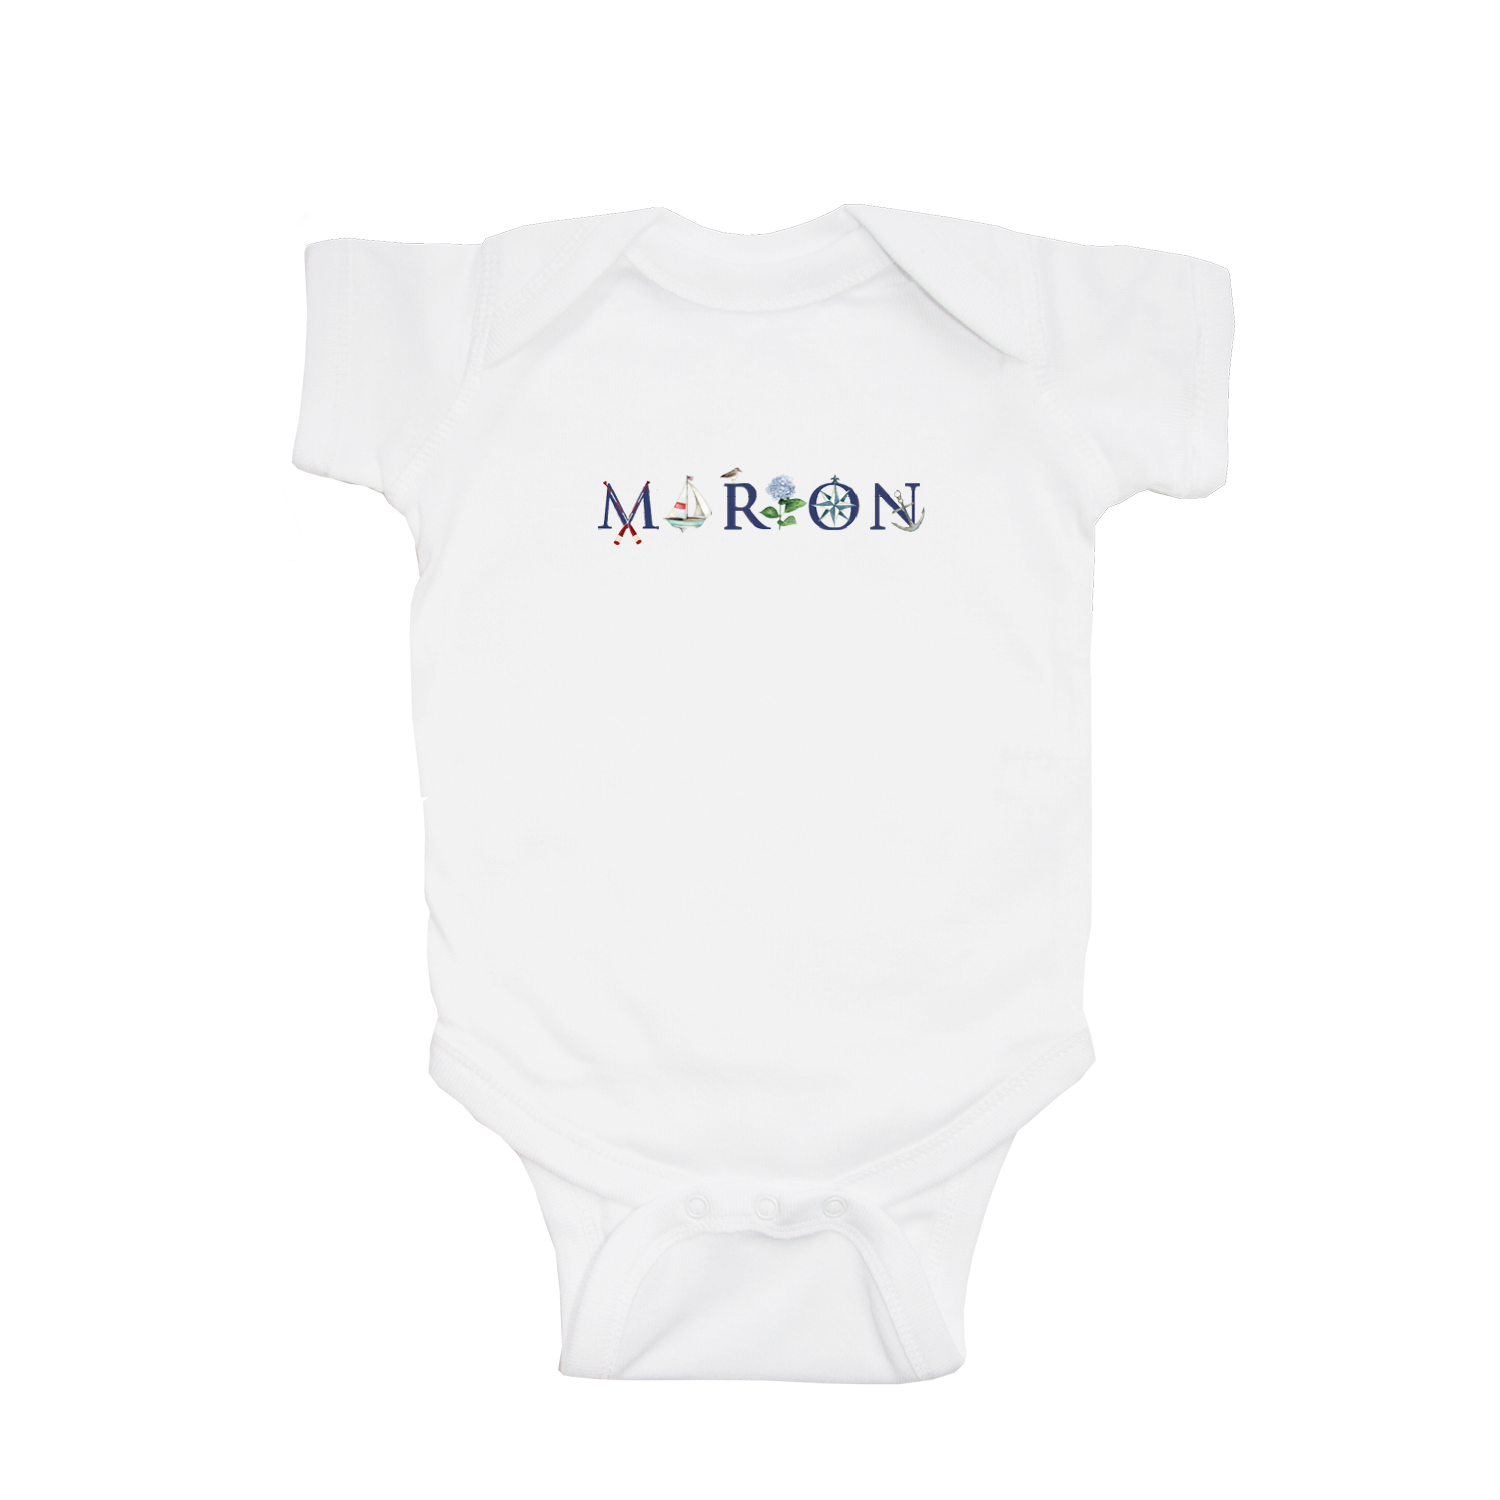 Marion baby snap up short sleeve